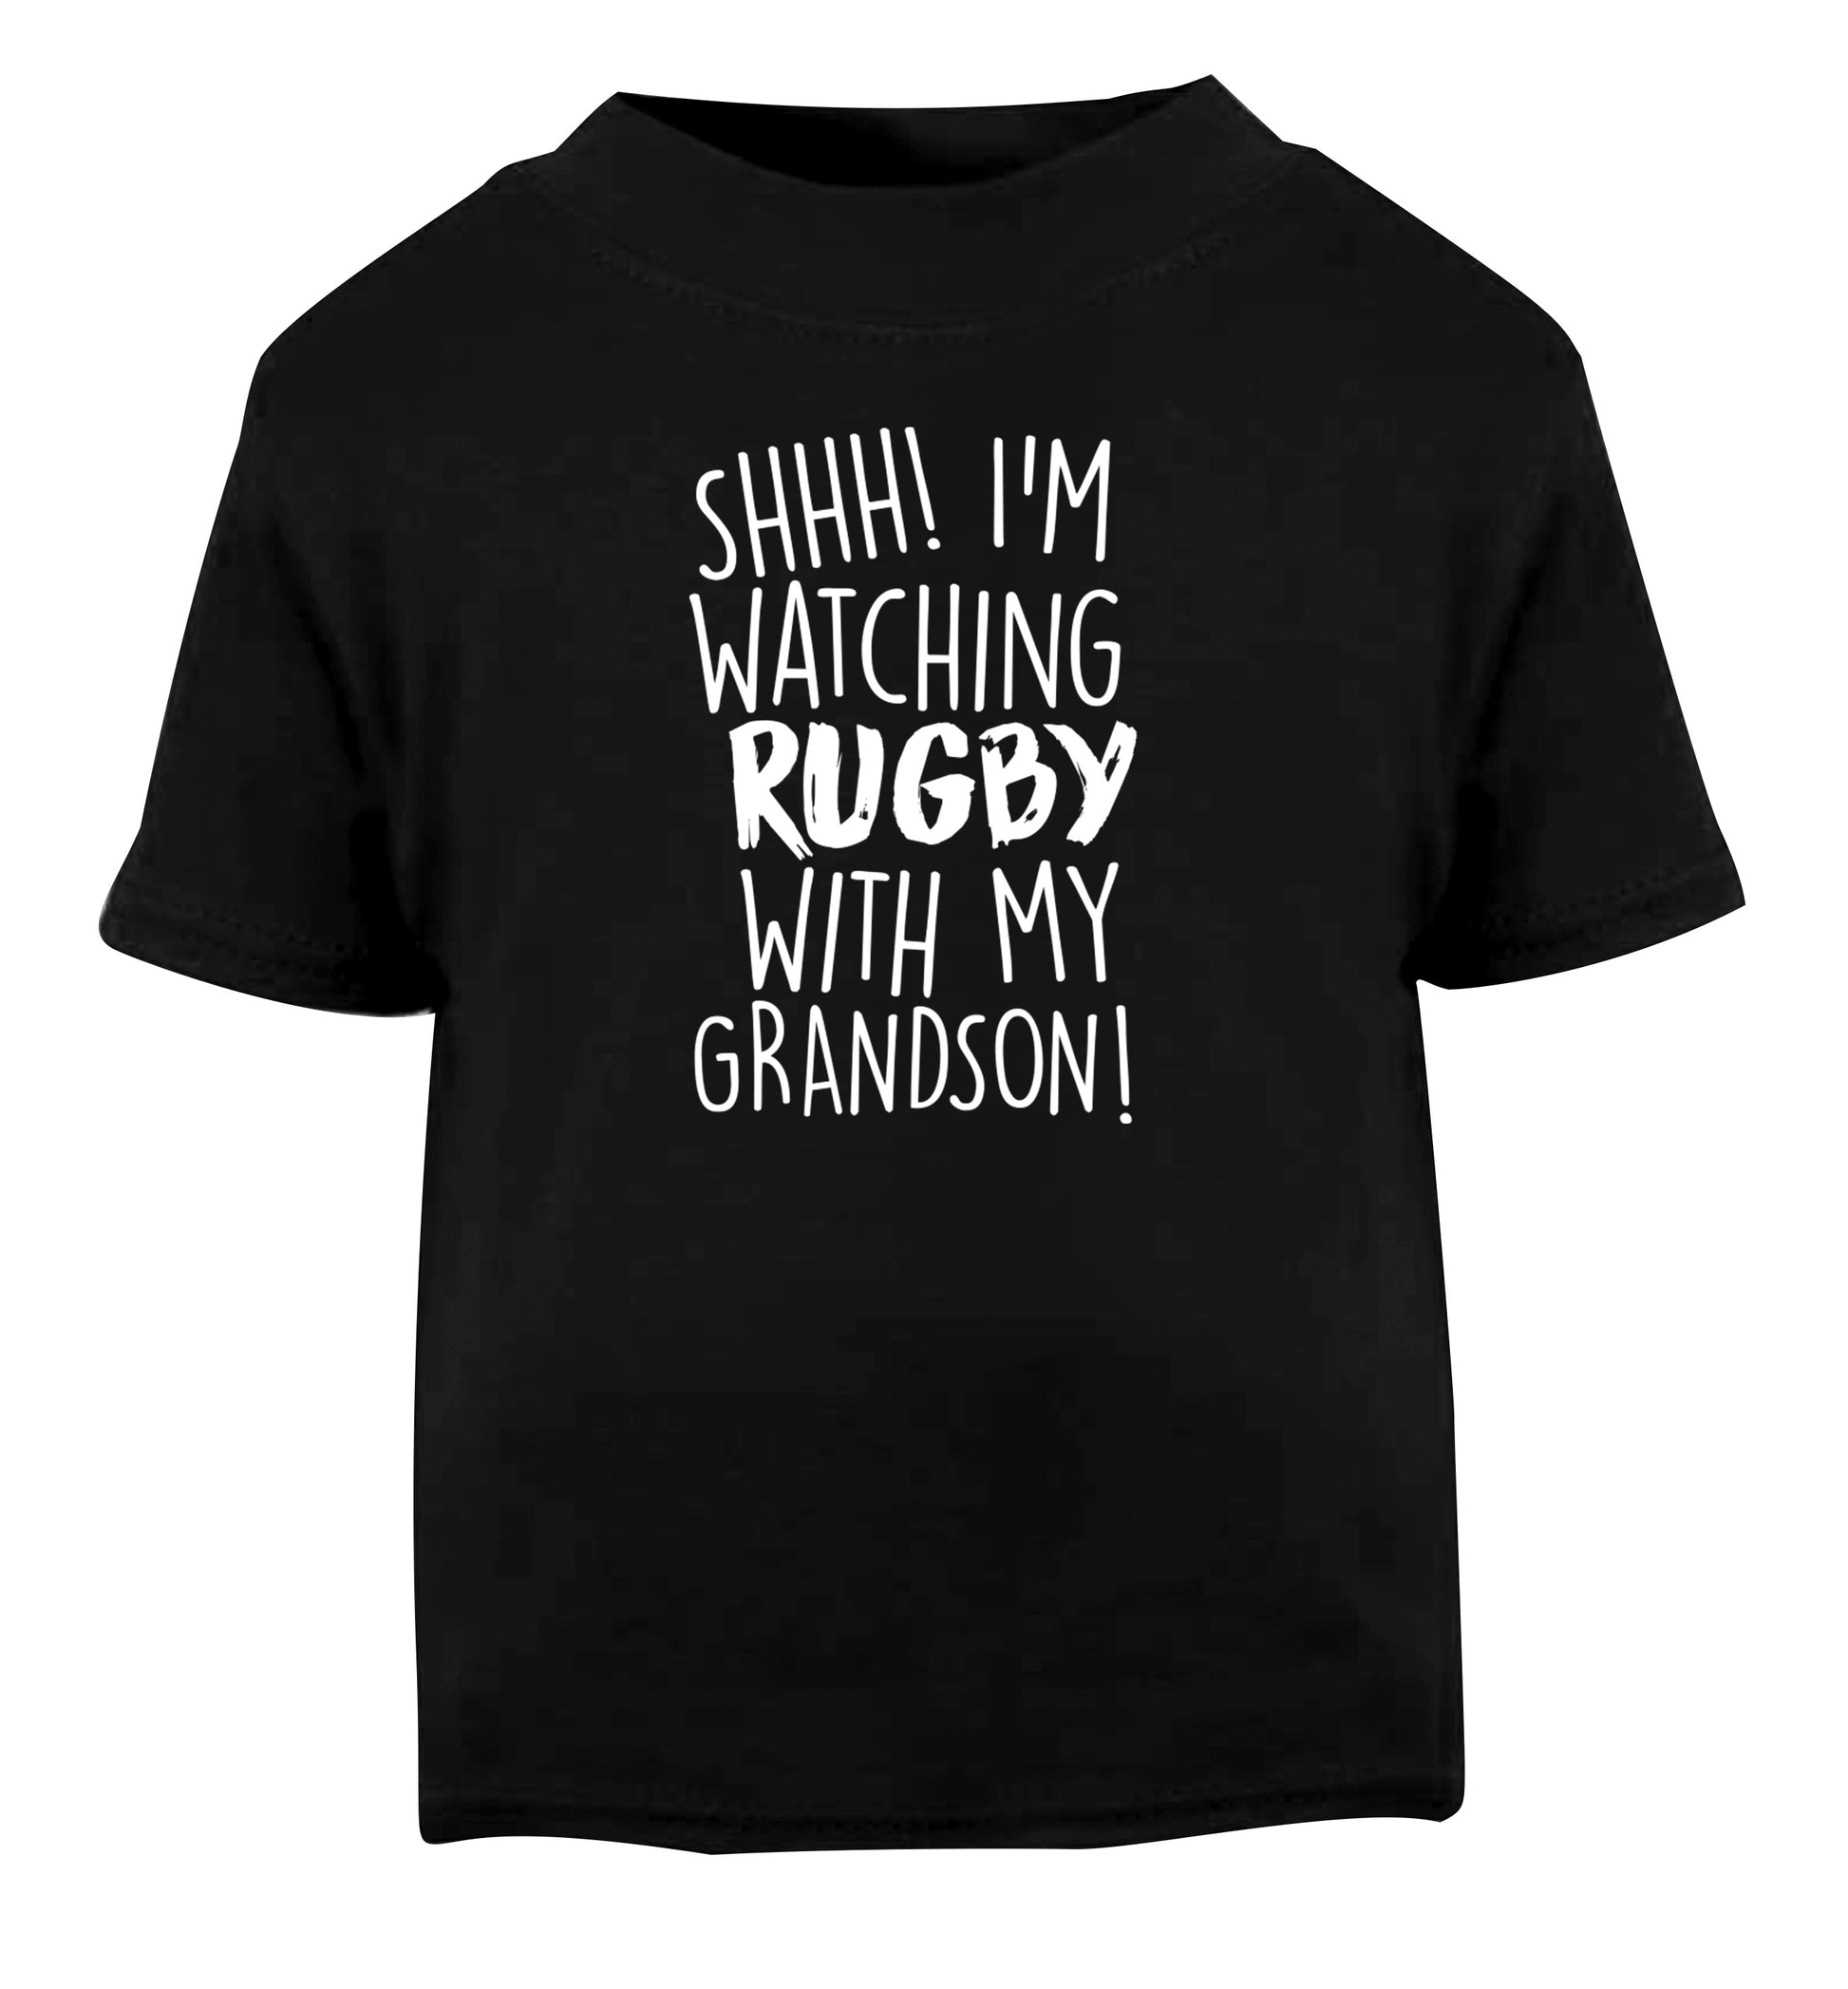 Shh I'm watching rugby with my grandson Black Baby Toddler Tshirt 2 years